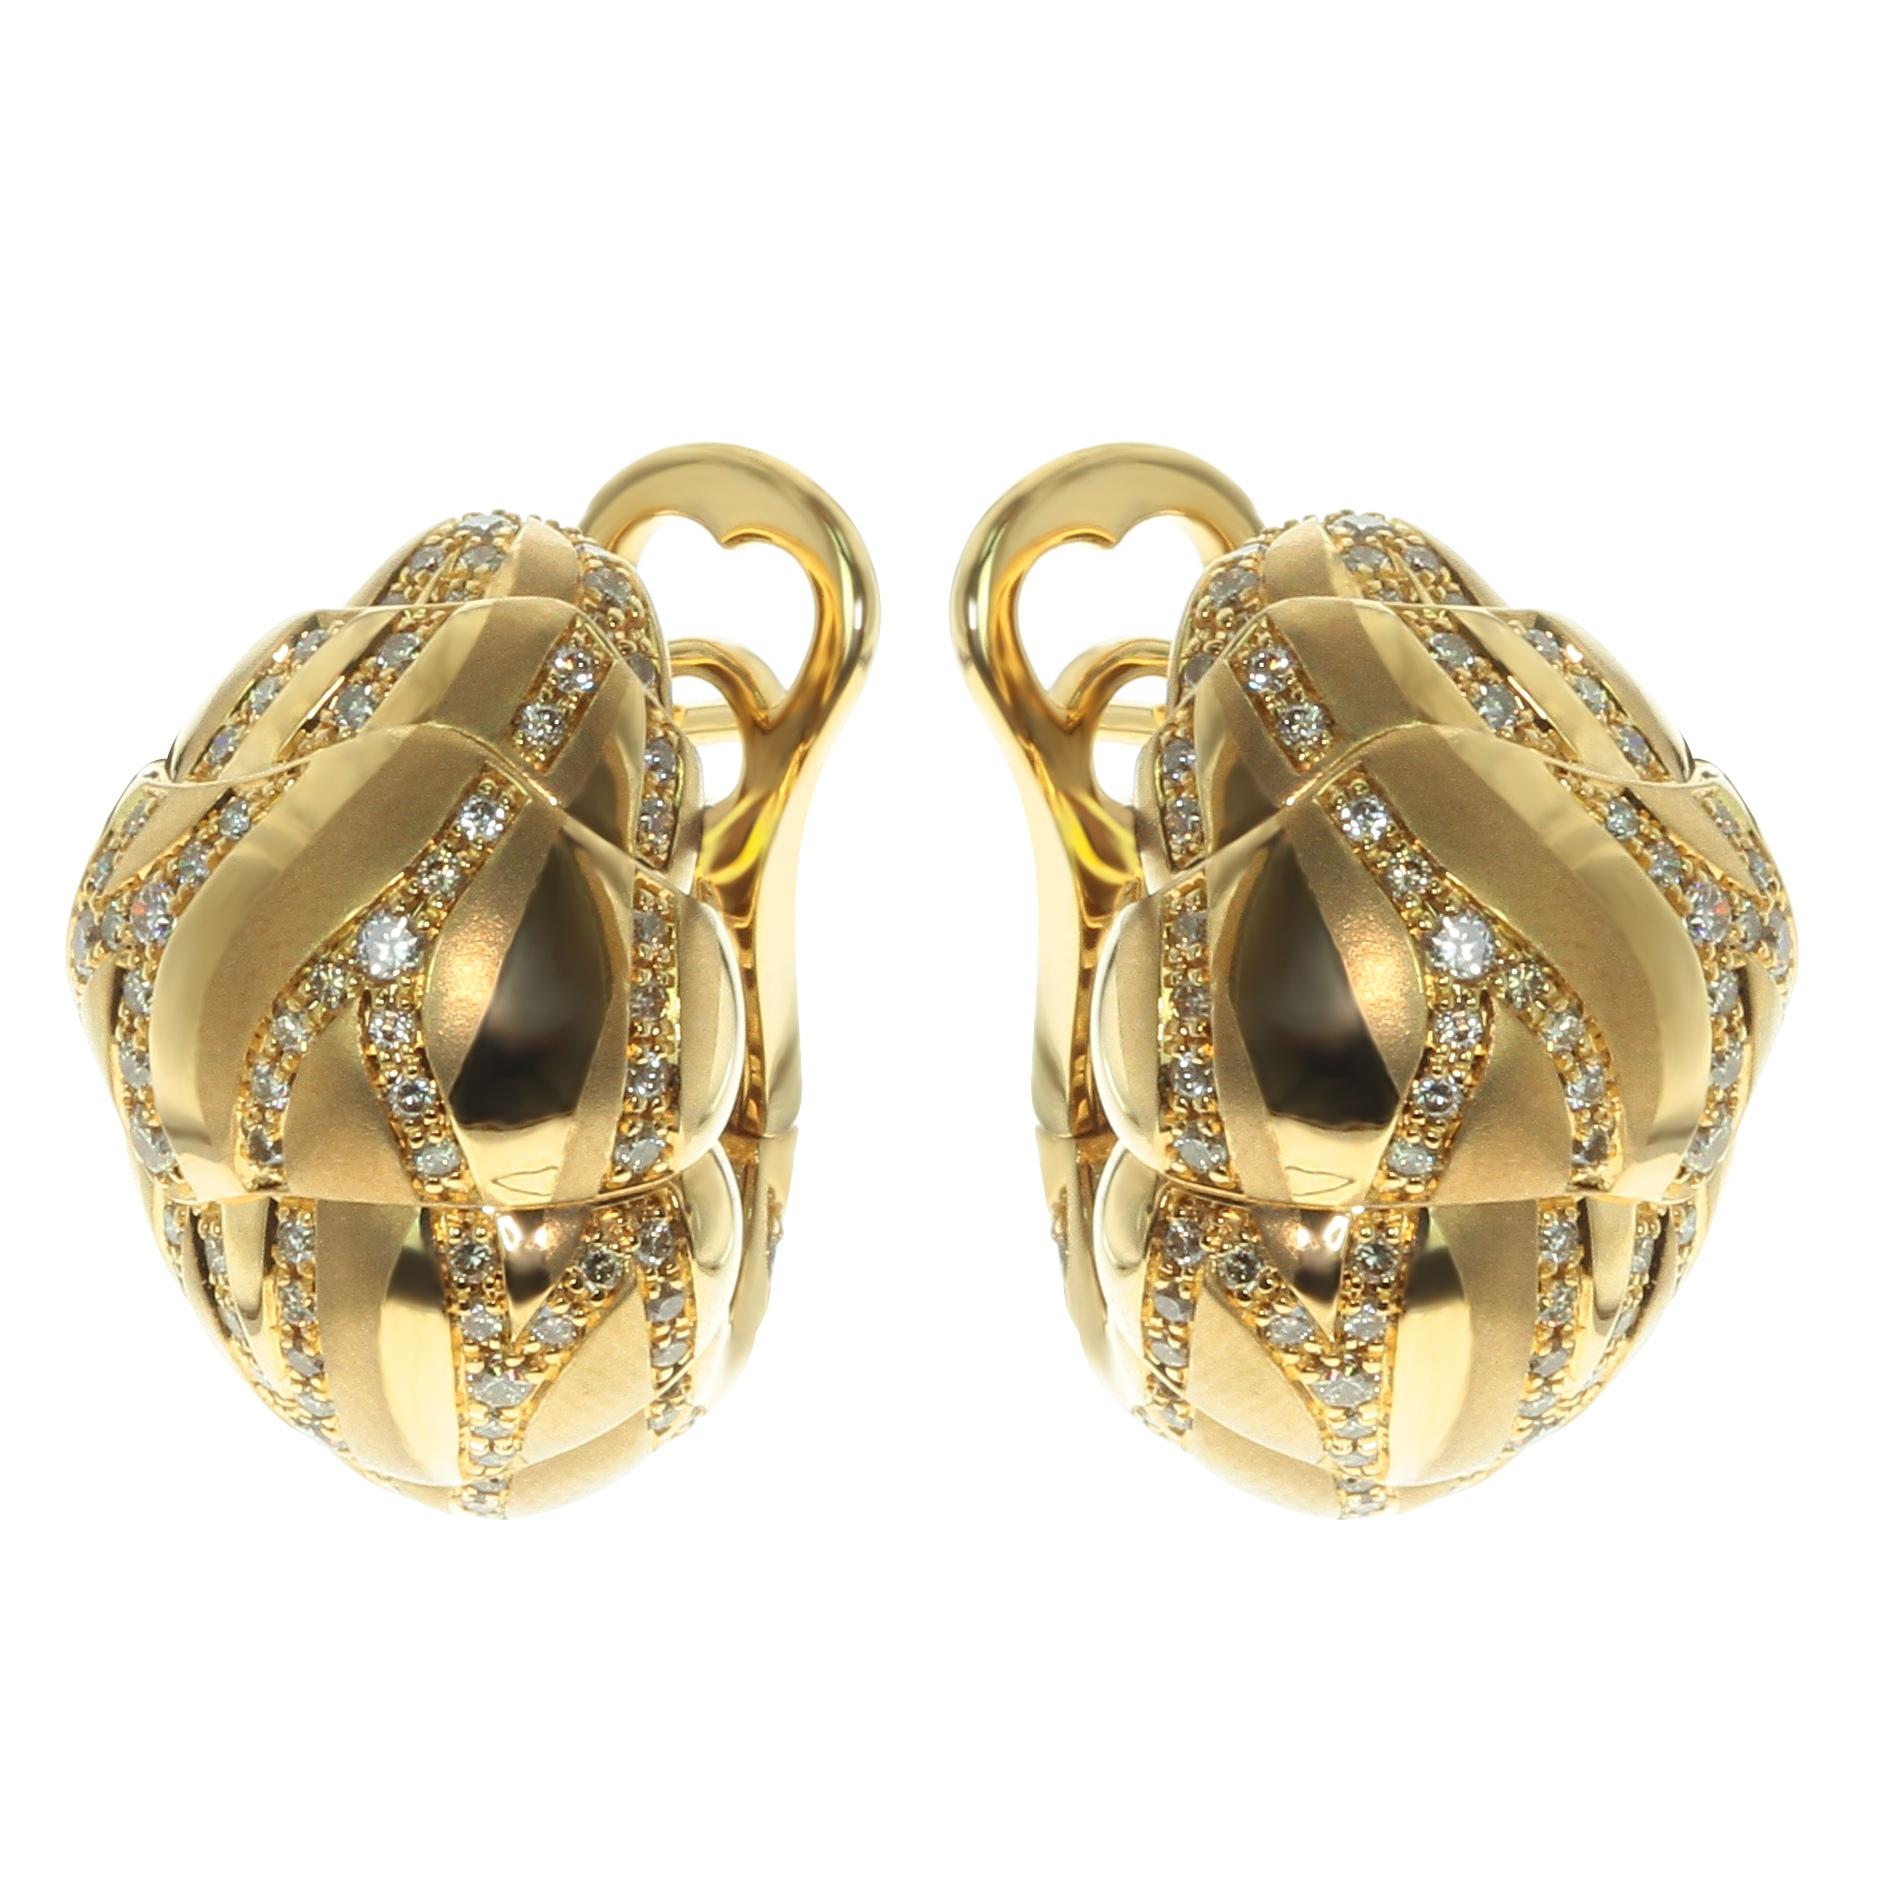 Brown Diamonds 18 Karat Yellow Gold Sand-Dune Earrings

Did You ever been in sand desert? Let us represent the earrings inspires by unhurried desert. Earring shapes and combination of polished and fine matt metal remains about sand-dunes. Lines of